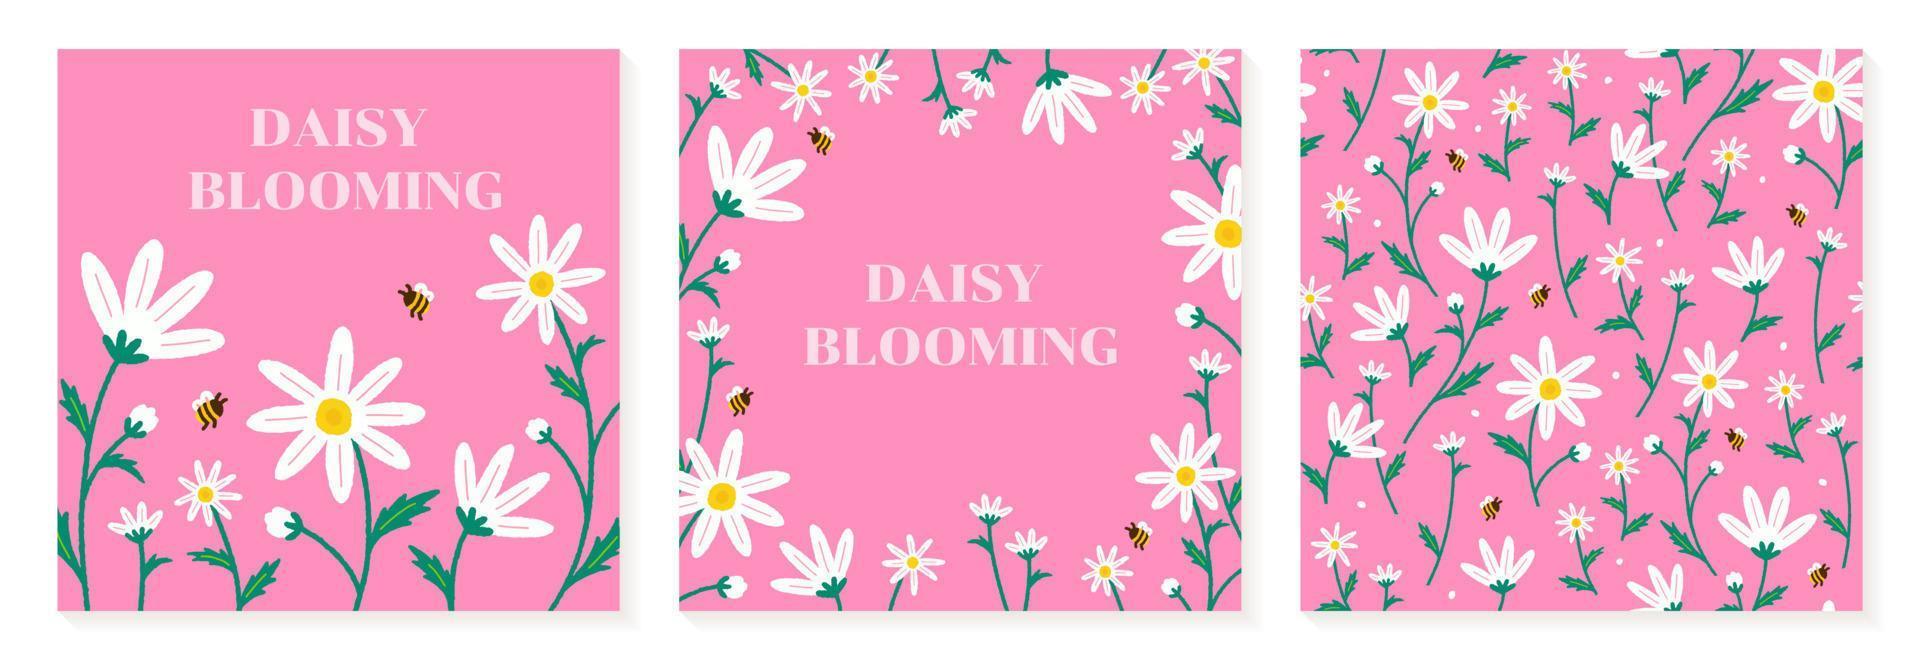 Cute Daisy Flower on Field Bee Spring White Pink Wedding Invitation Card Template Frame Border Banner Advertisement Post Postcard Square Seamless Pattern Vector Illustration Set Collection Bundle Pack